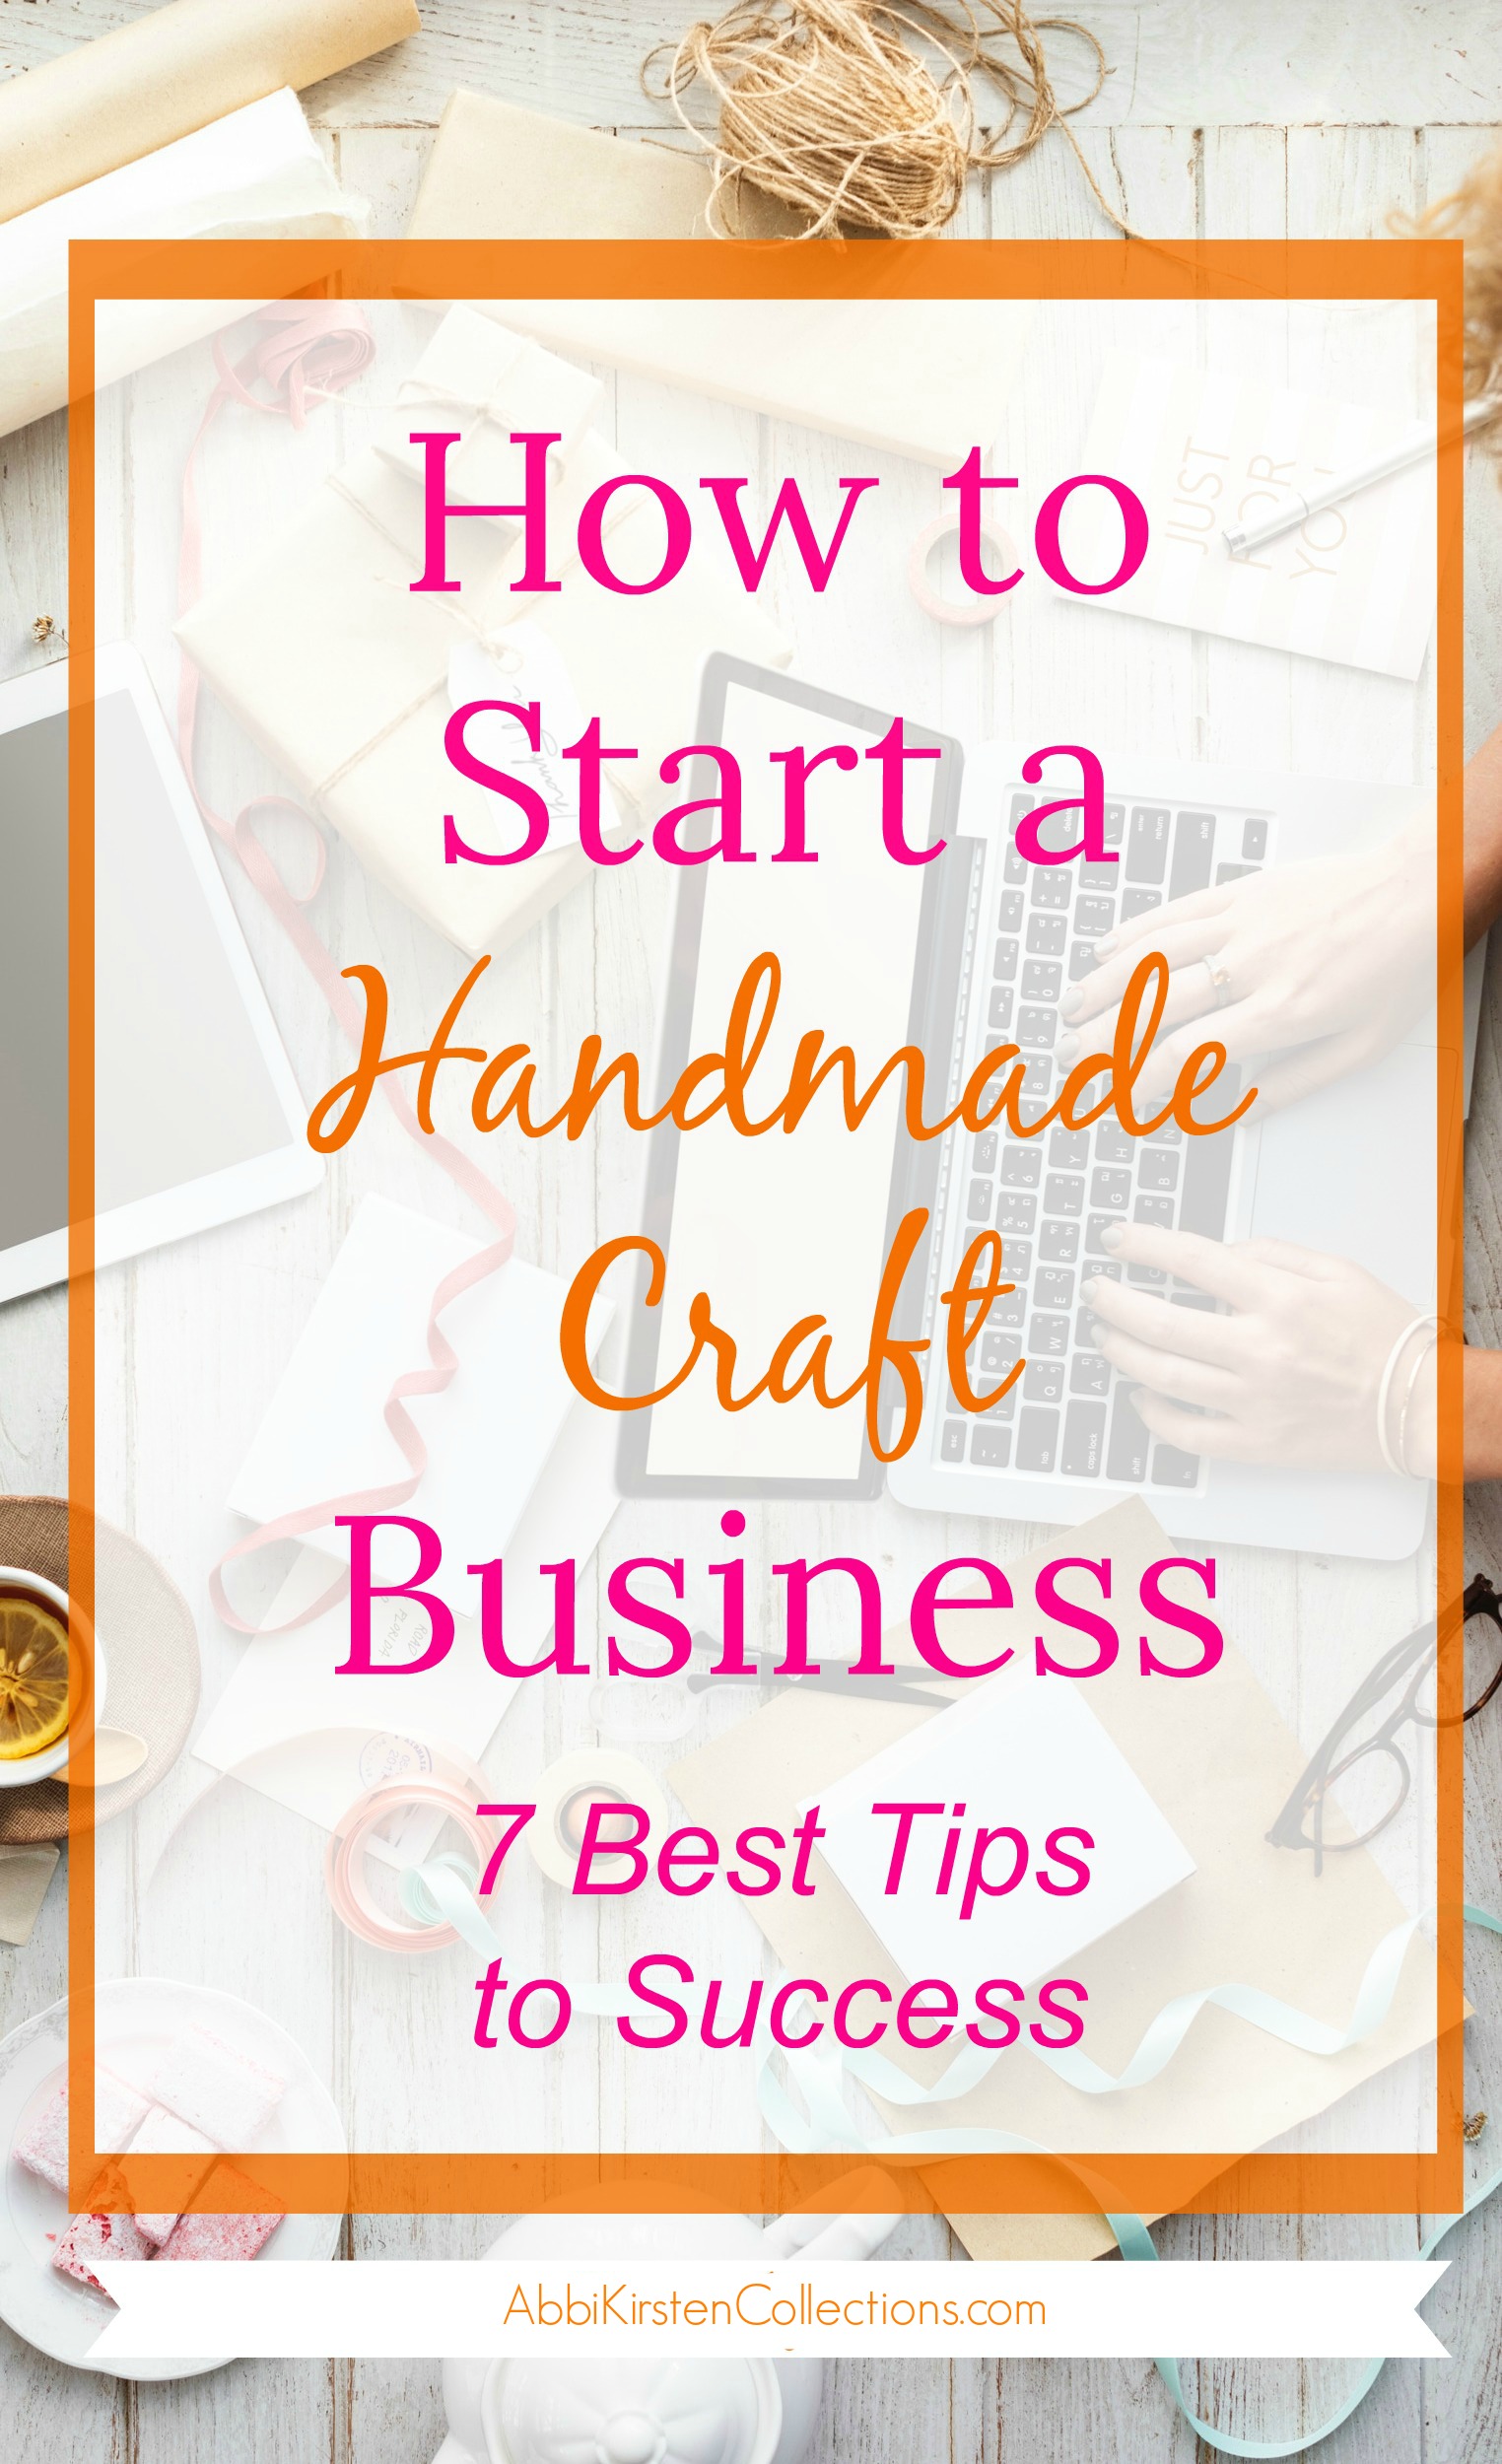 A background image of a person working on a laptop desk cluttered with crafting supplies. Text overlayed on the image says "how to start a handmade craft business: 7 best tips to success"